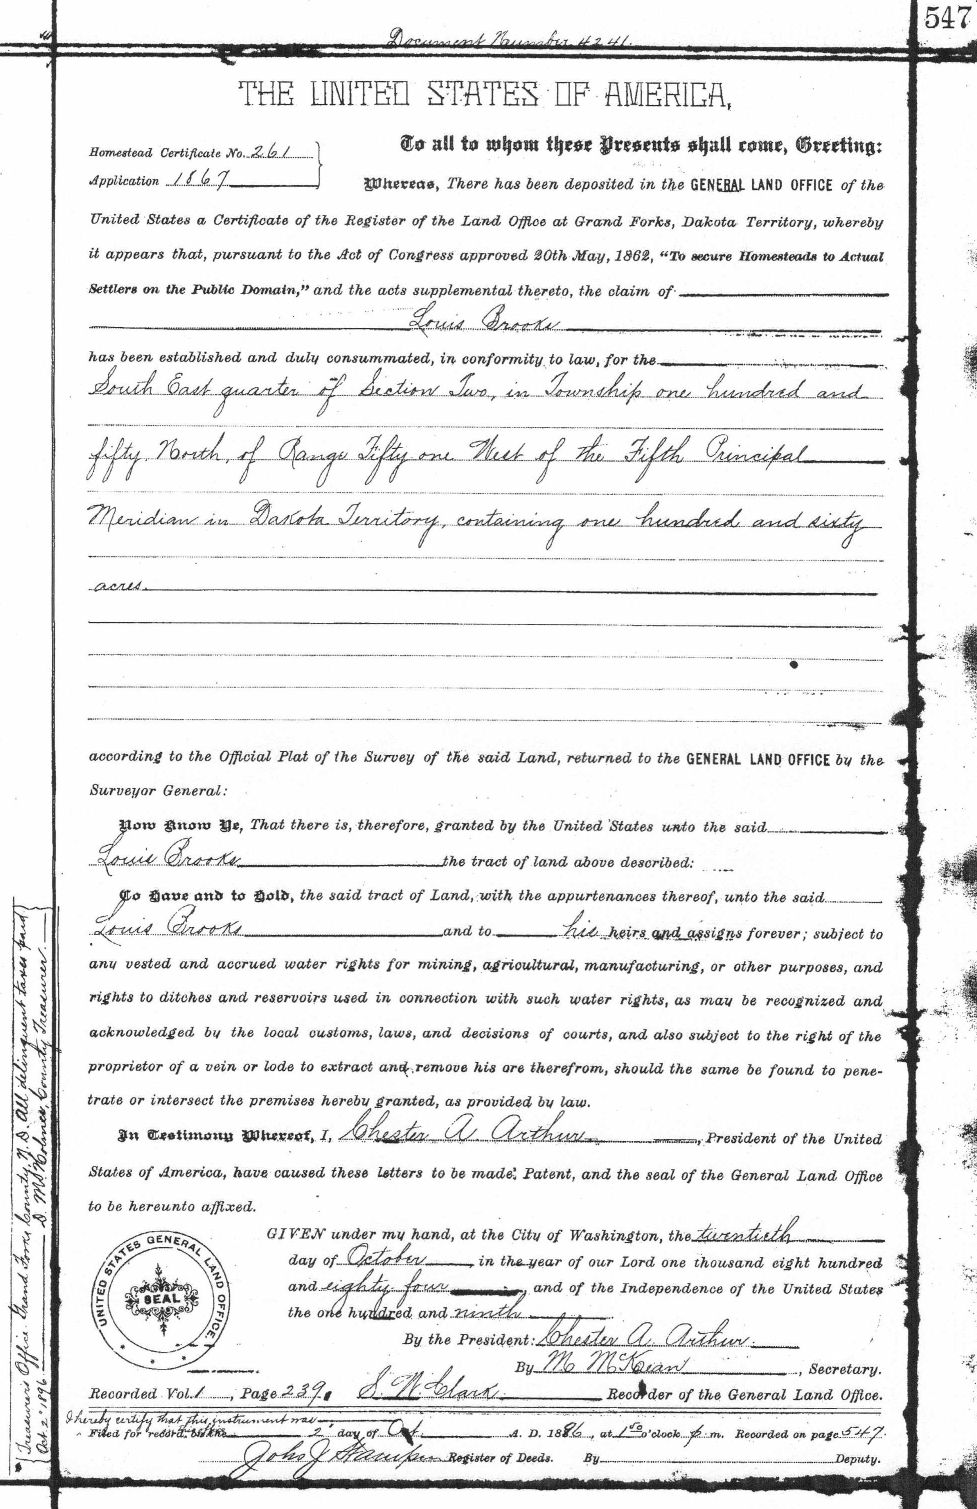 Page 283 Book N of Deed N.D. between USA and Louis Brooks